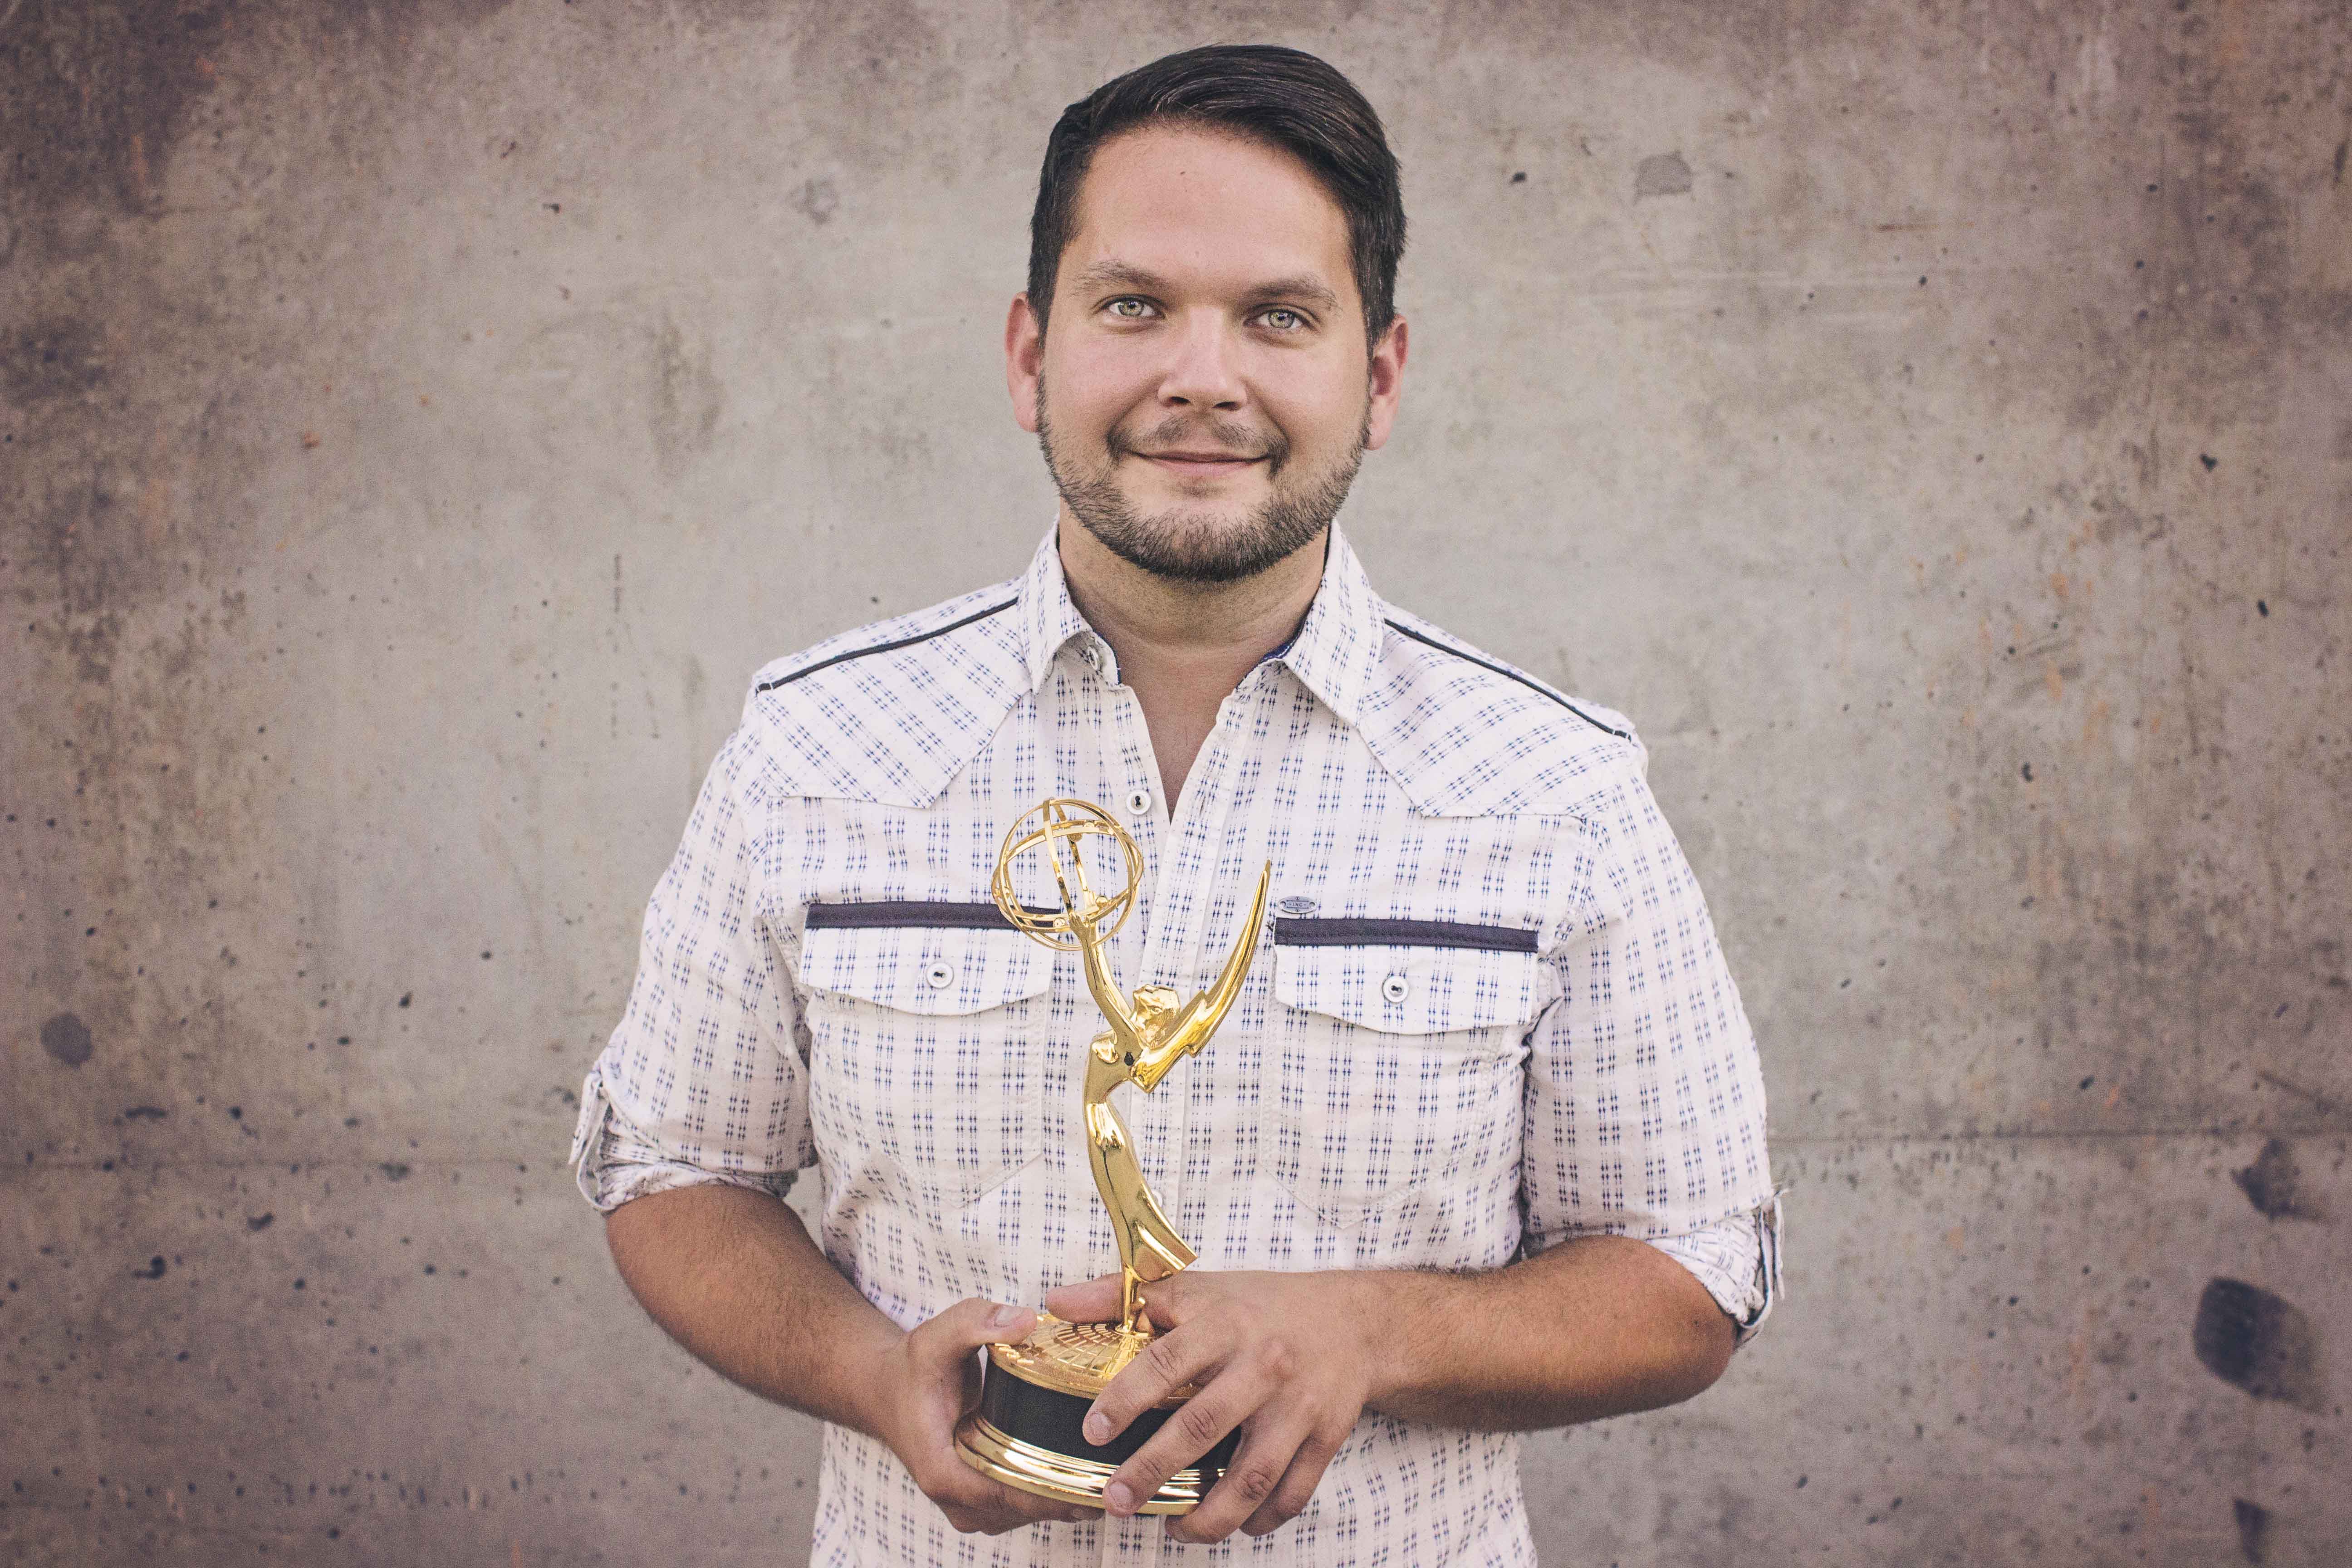 Evan with is Emmy Award from the 67th Annual Los Angeles Regional Emmys.